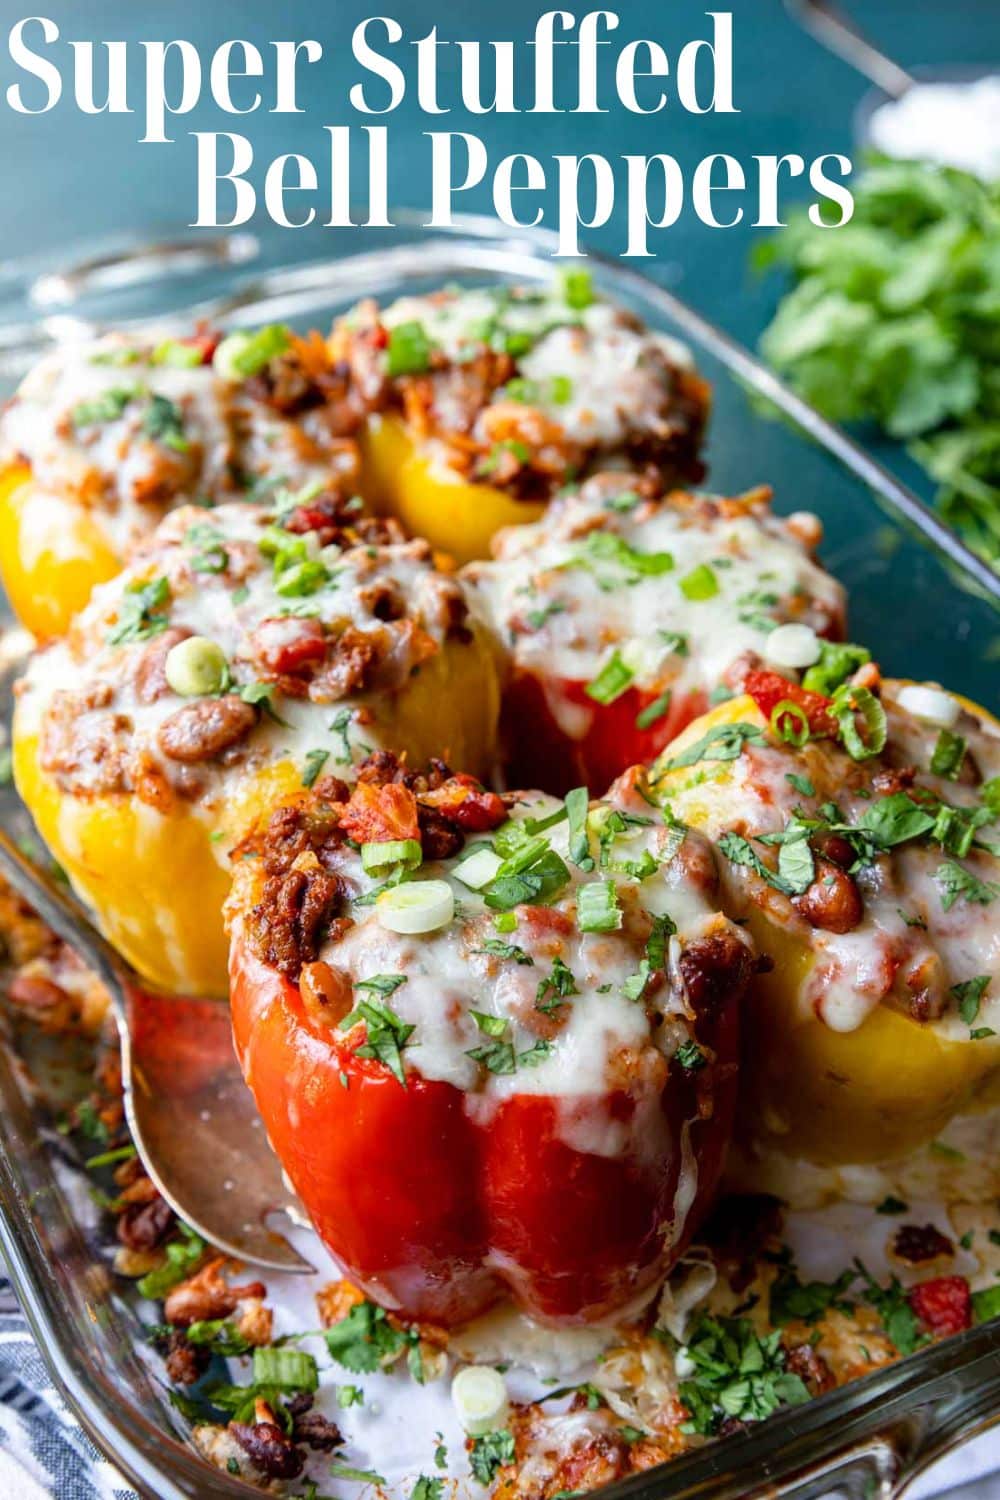 Pinterest image of stuffed peppers with text overlay